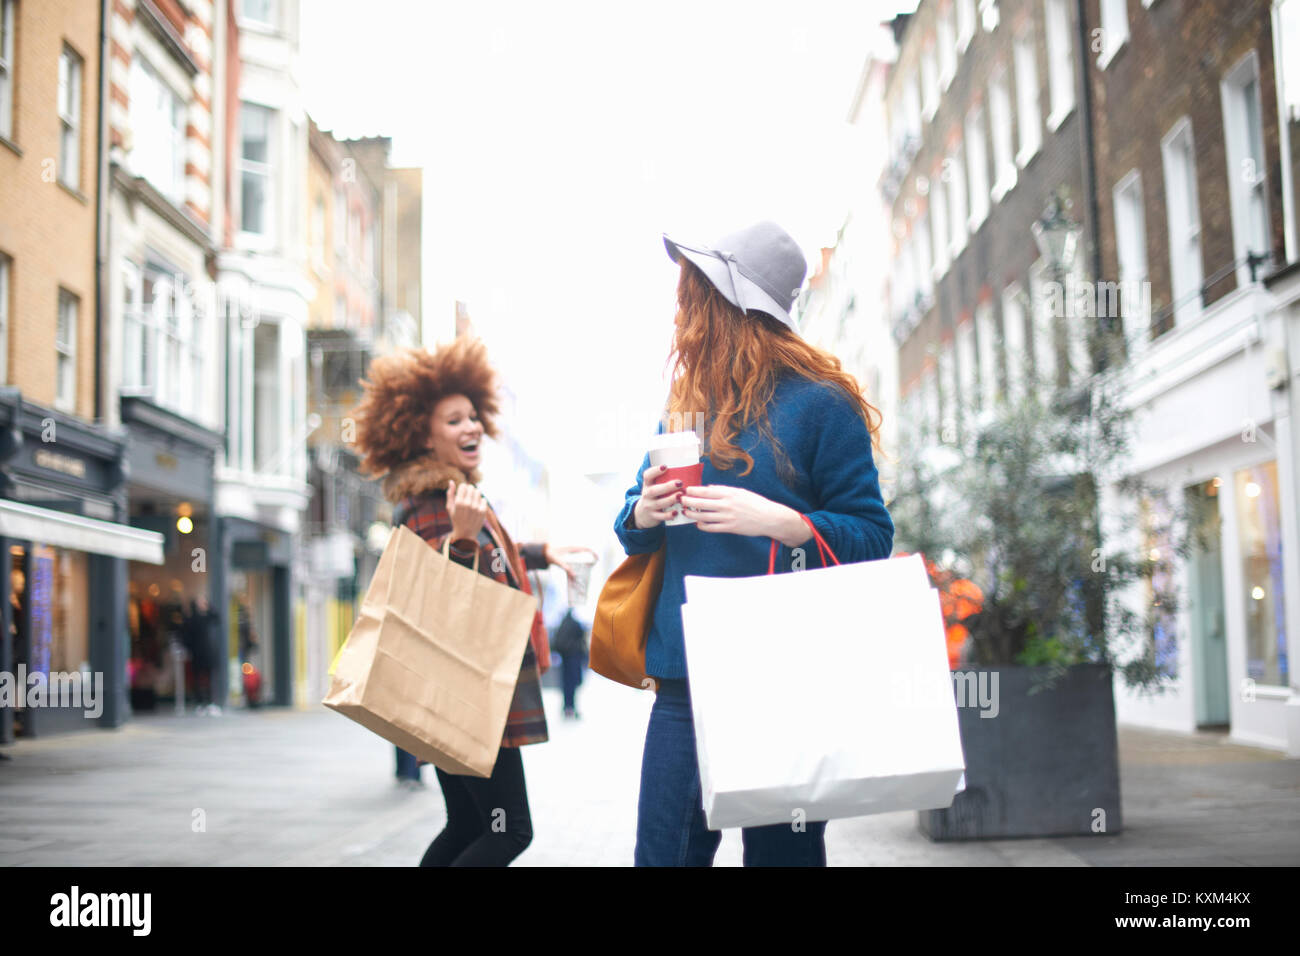 Two young women,holding shopping bags,passing each other in street Stock Photo